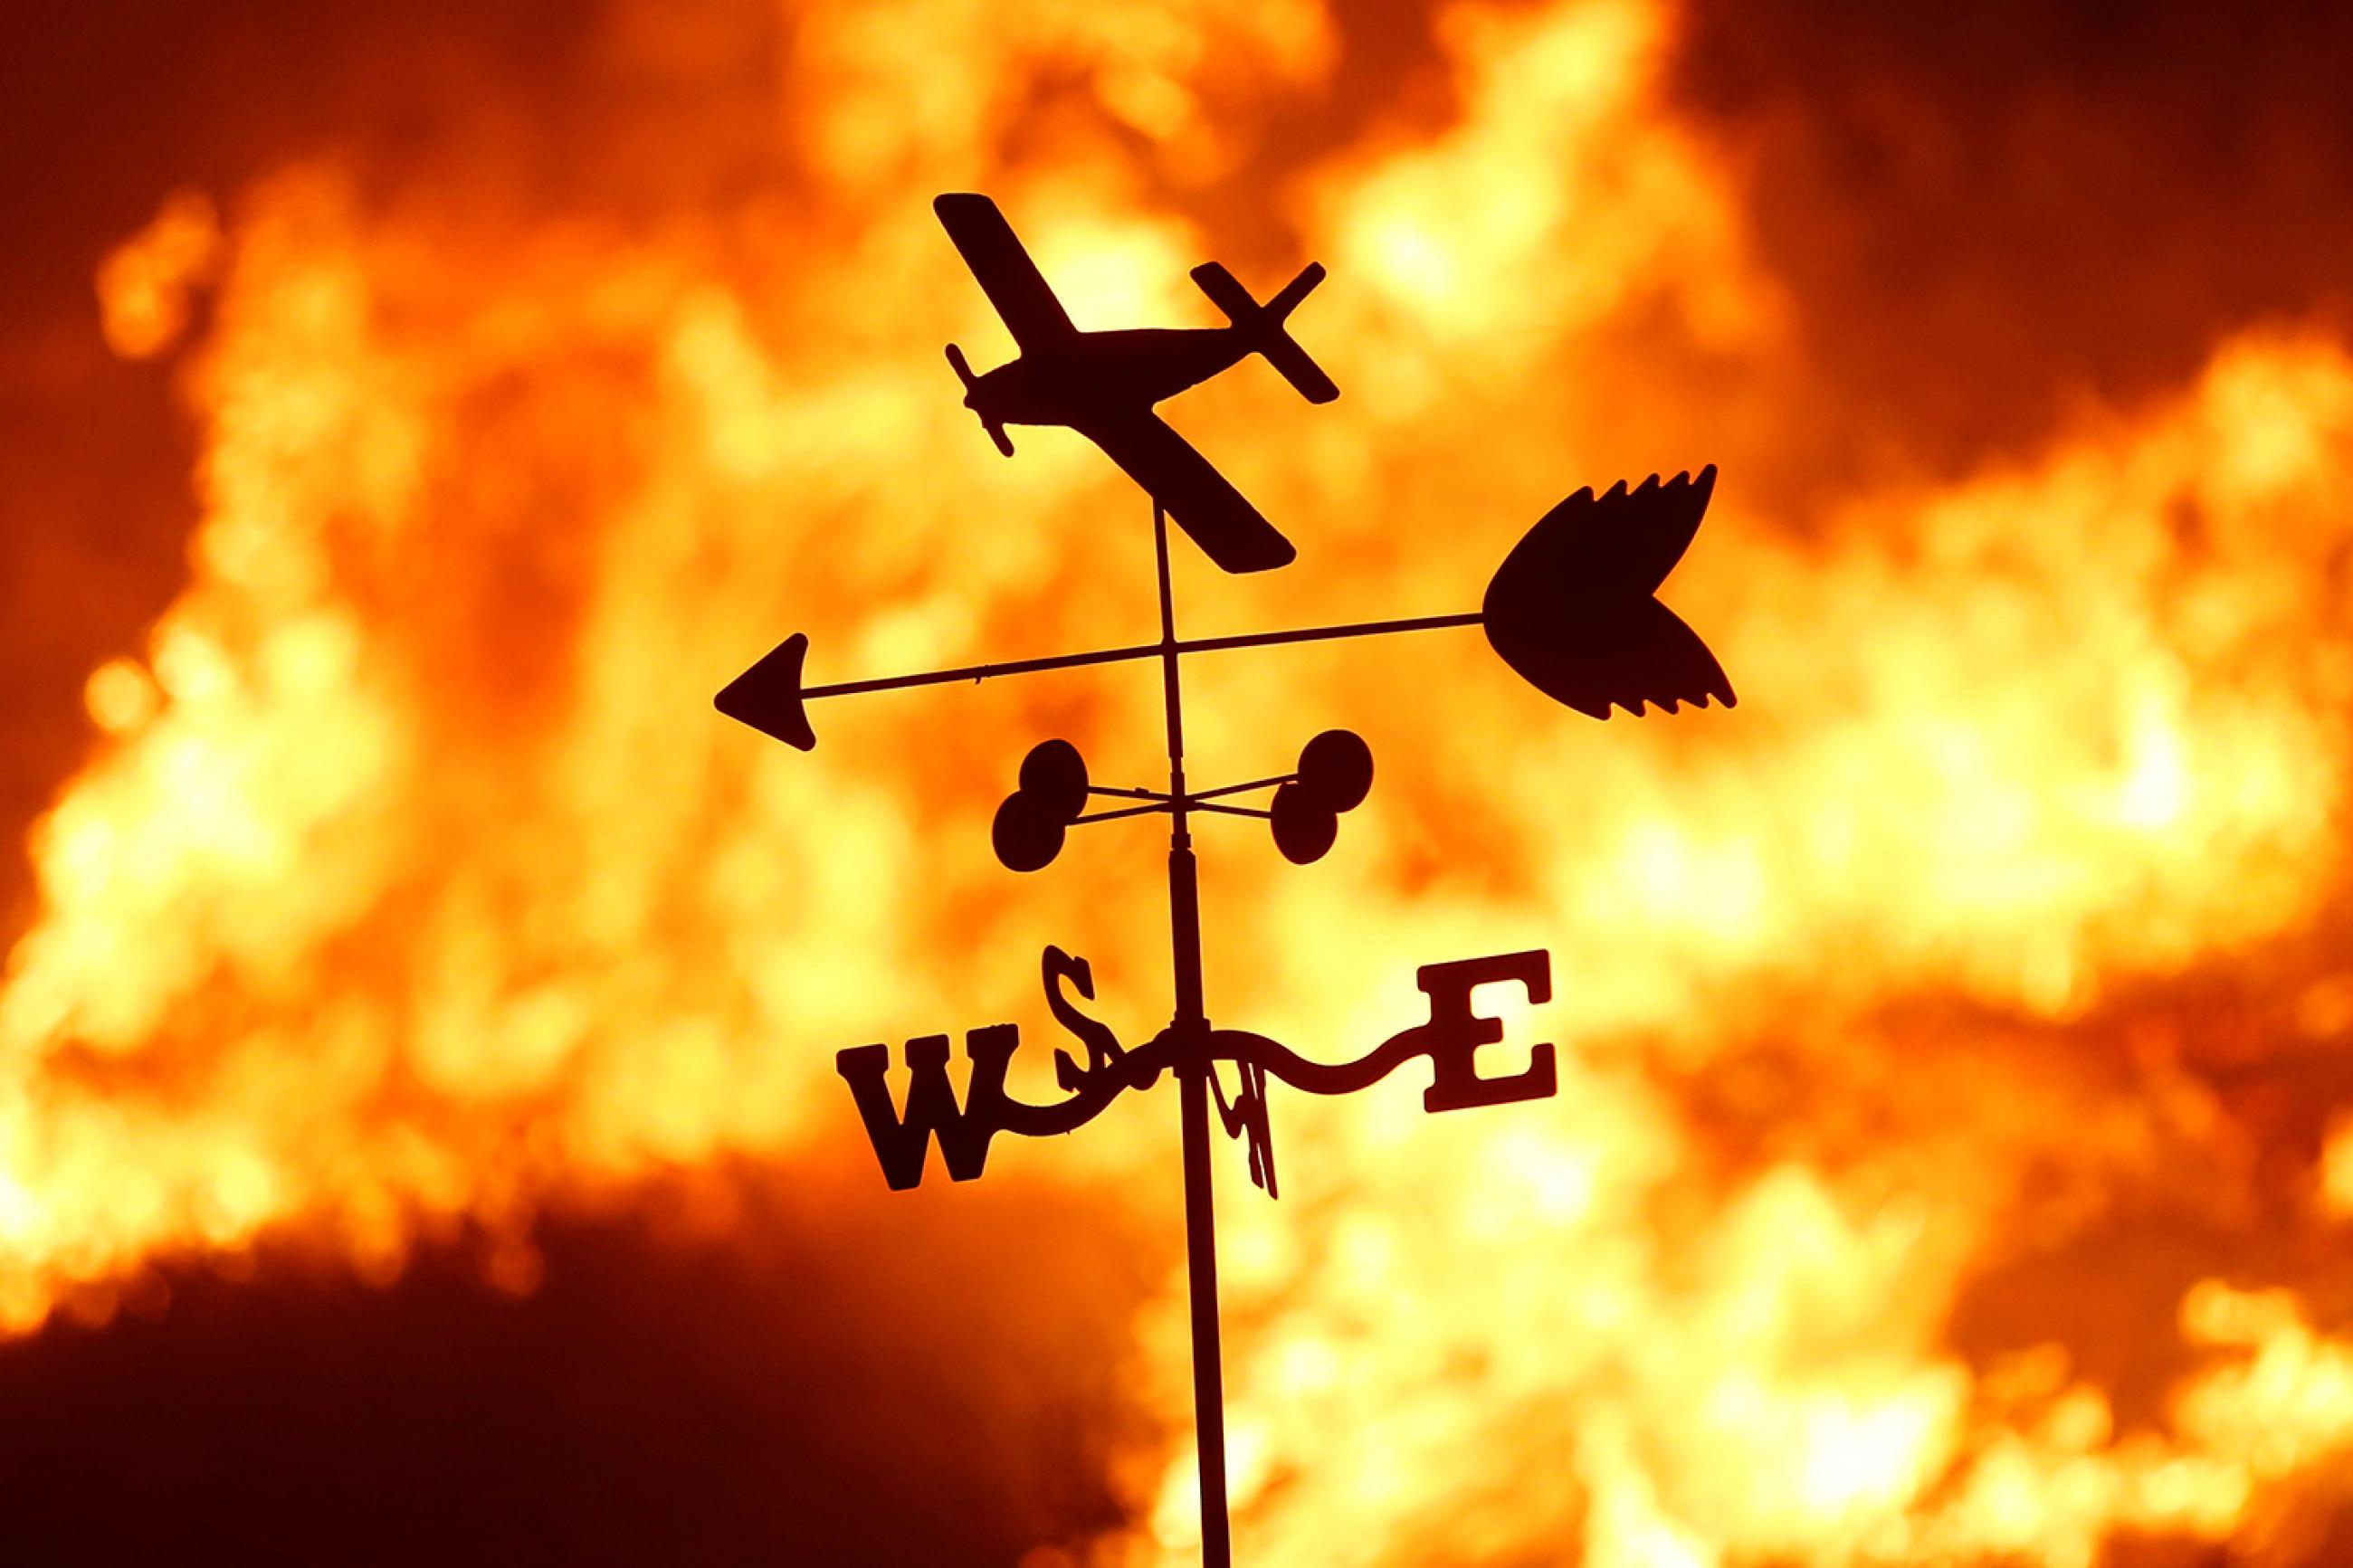 A weather vane is pictured on a ranch during the Creek Fire in the San Fernando Valley north of Los Angeles, in Sylmar, California on December 5, 2017. Picture shows a thin metal toy-like vain with a plane, and arrow and a “NESW” directional indicator silhouetted against a burning fire. REUTERS/Jonathan Alcorn